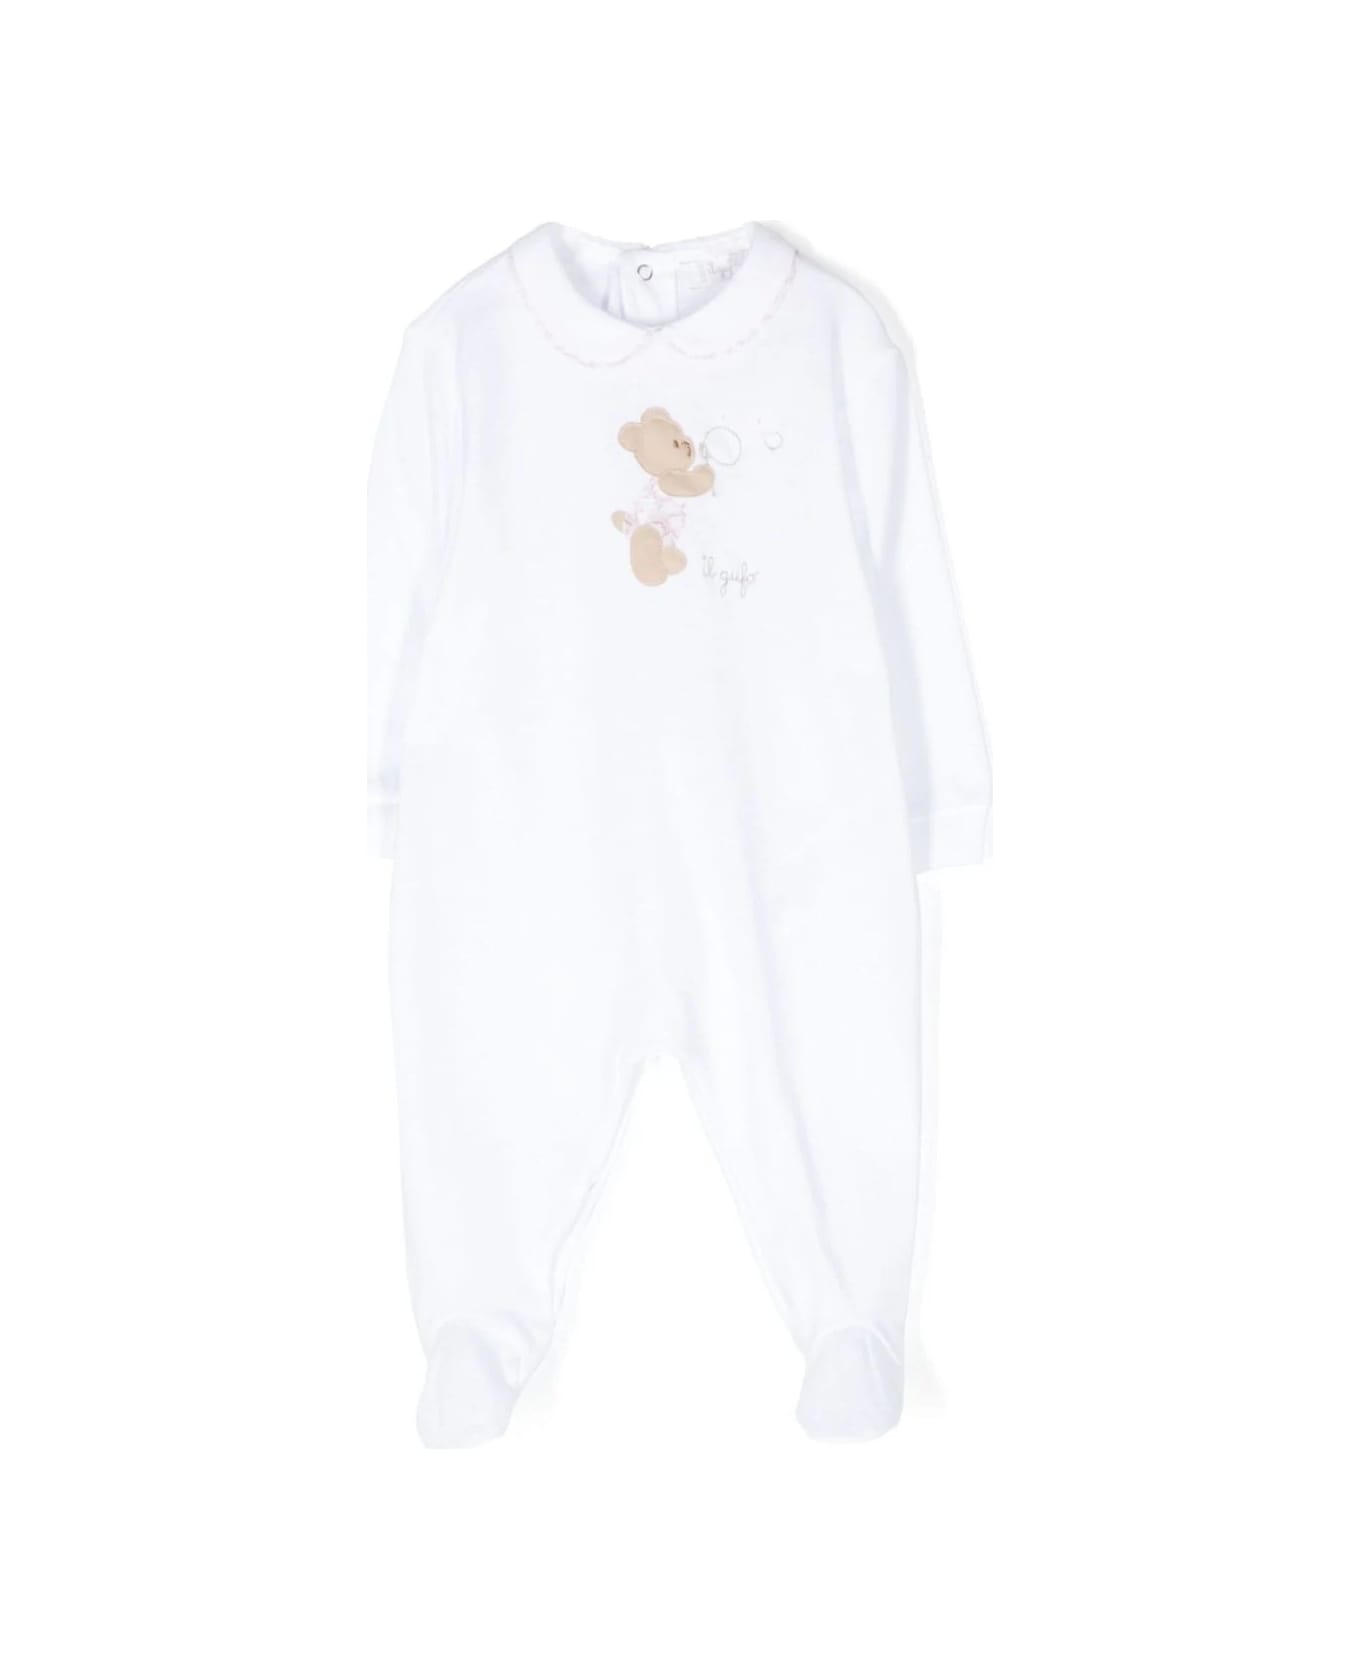 Il Gufo White Playsuit With Feet And Teddy-bear Embellishment - Pink トップス